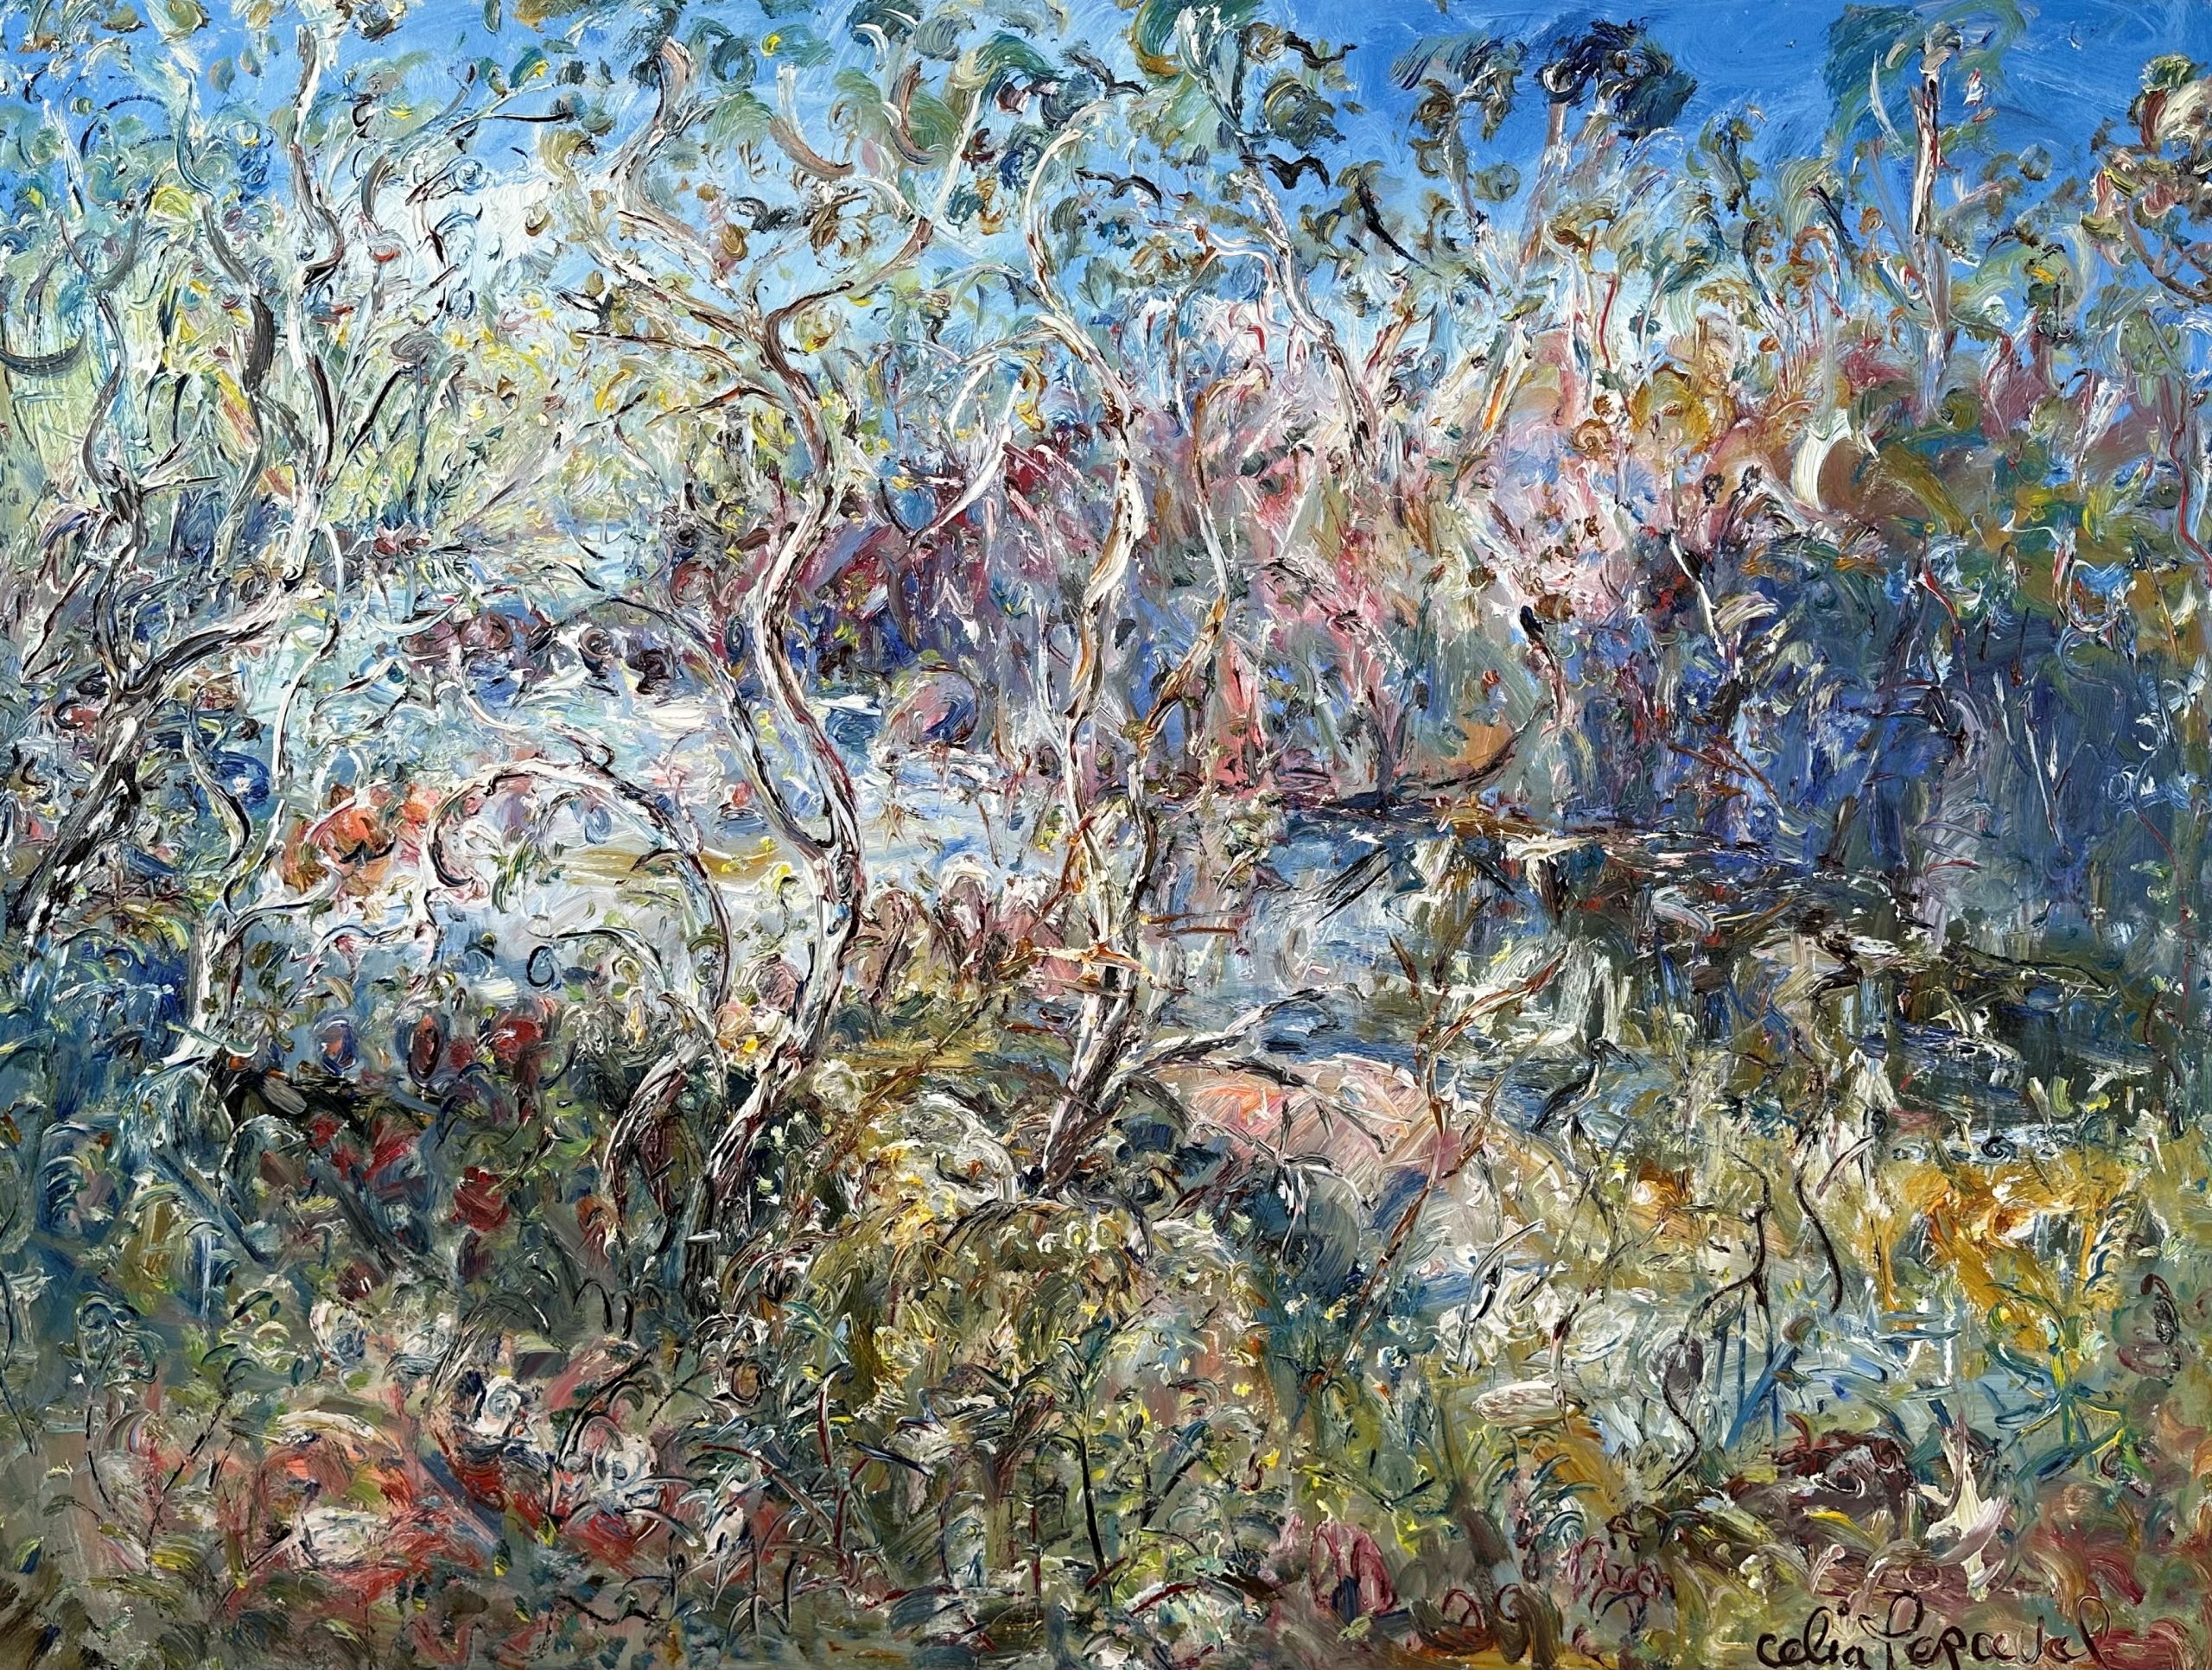 Celia Perceval, 'Wildflowers and Ibis in the Upper Shoalhaven', oil on canvas, 122 x 160cm, $35,000 | Provenance: Private Collection, Sydney